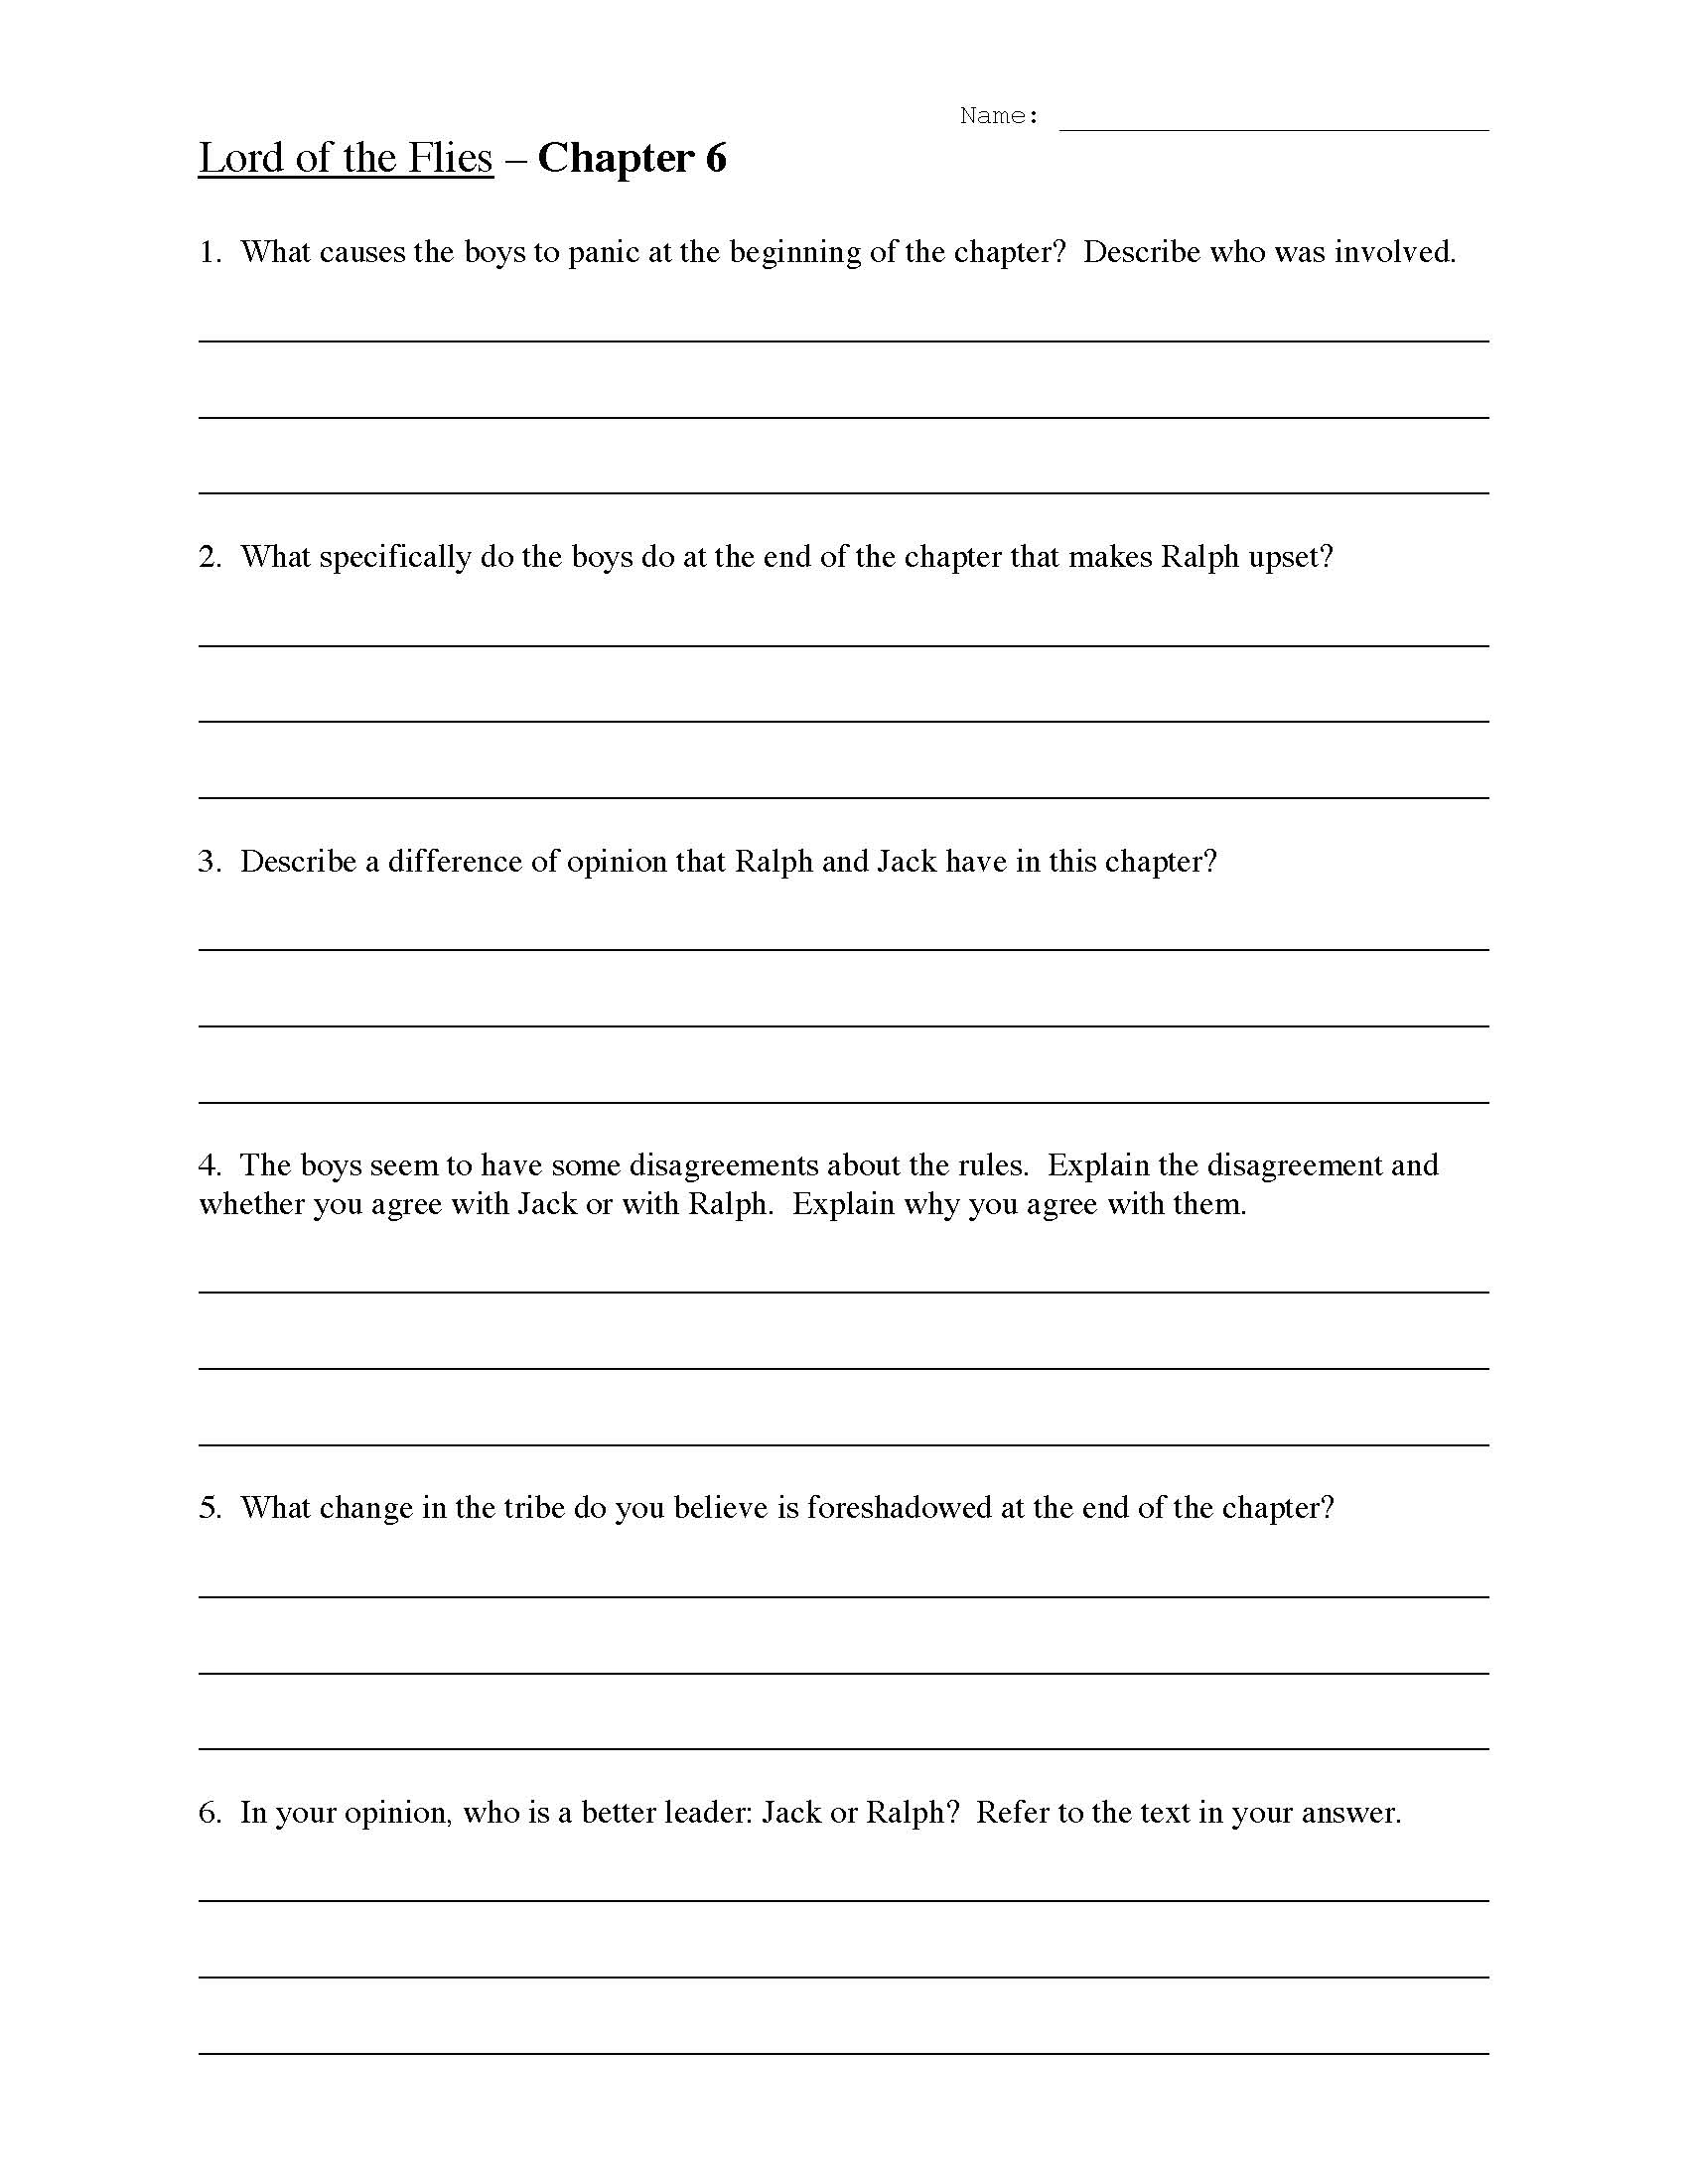 This is a preview image of the Lord of the Flies Chapter Six Worksheet.